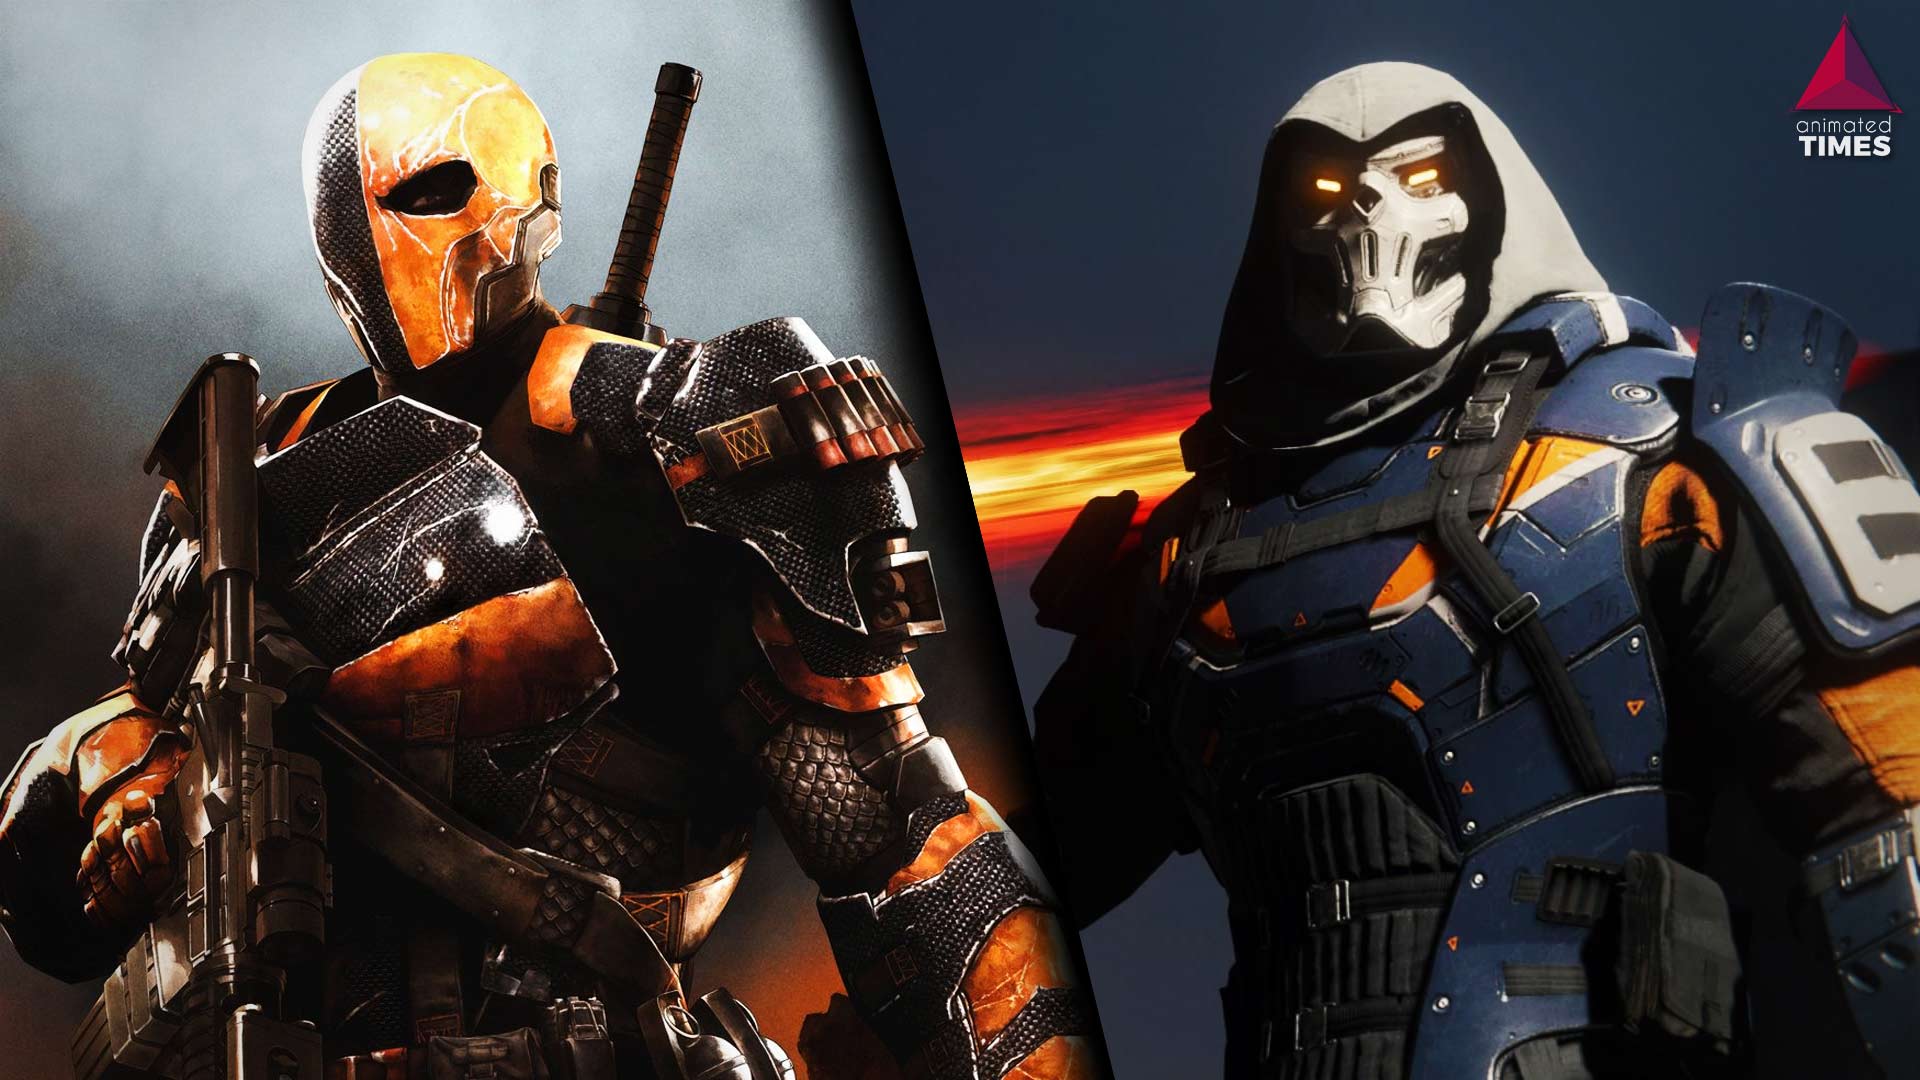 Taskmaster Vs Deathstroke: Who Would Emerge Victorious?